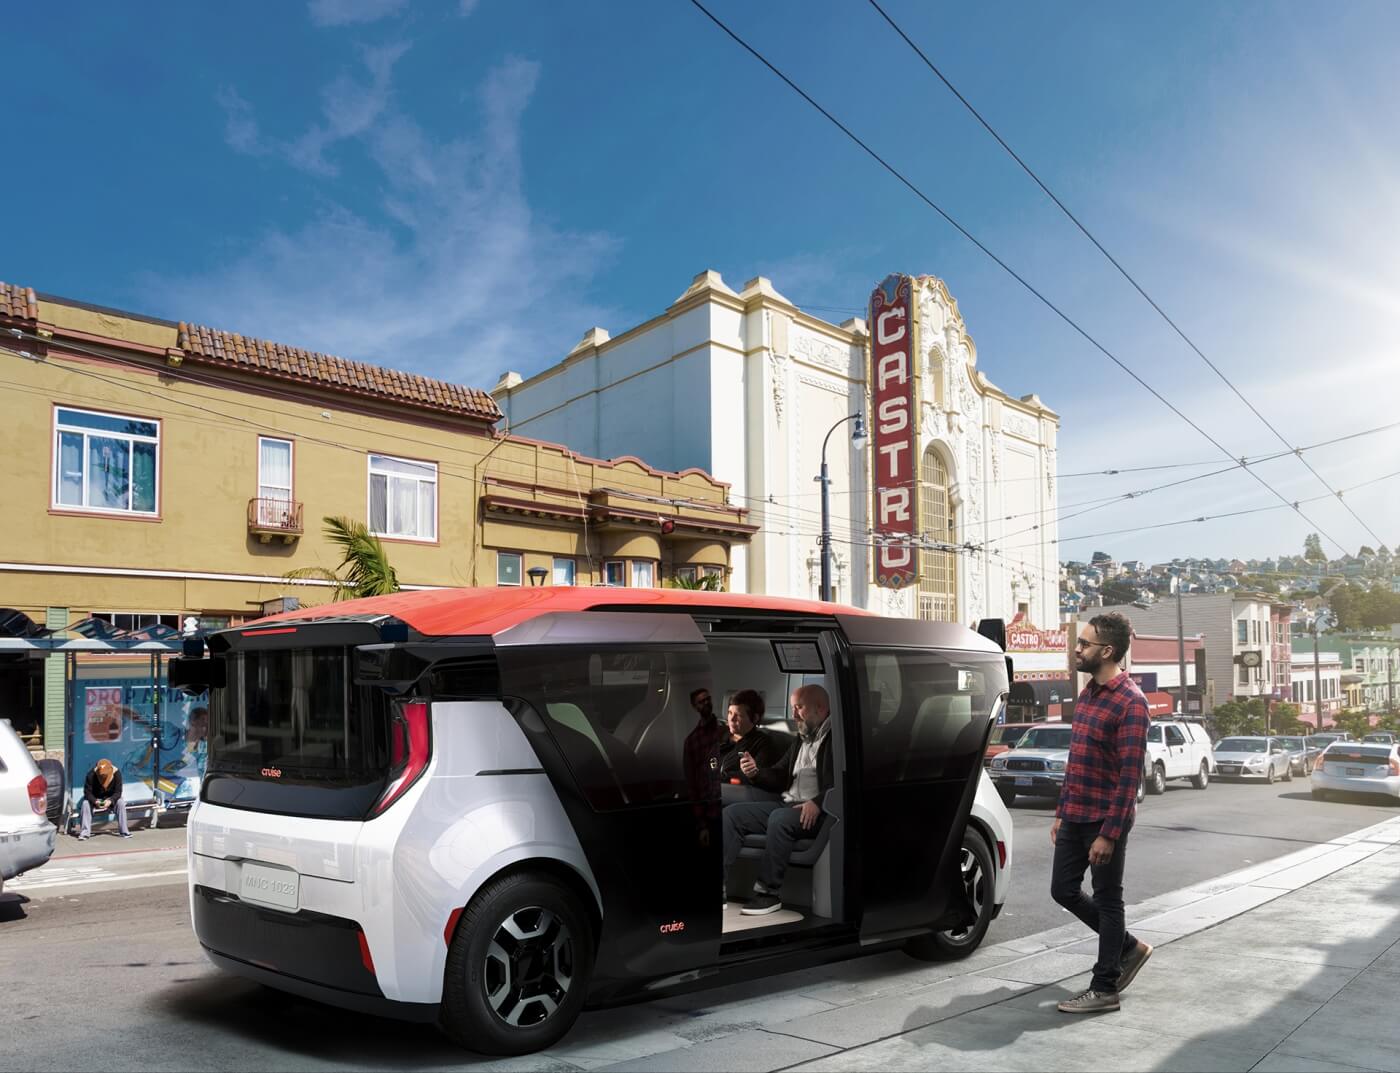 Cruise's self-driving electric shuttle is purpose built for ridesharing